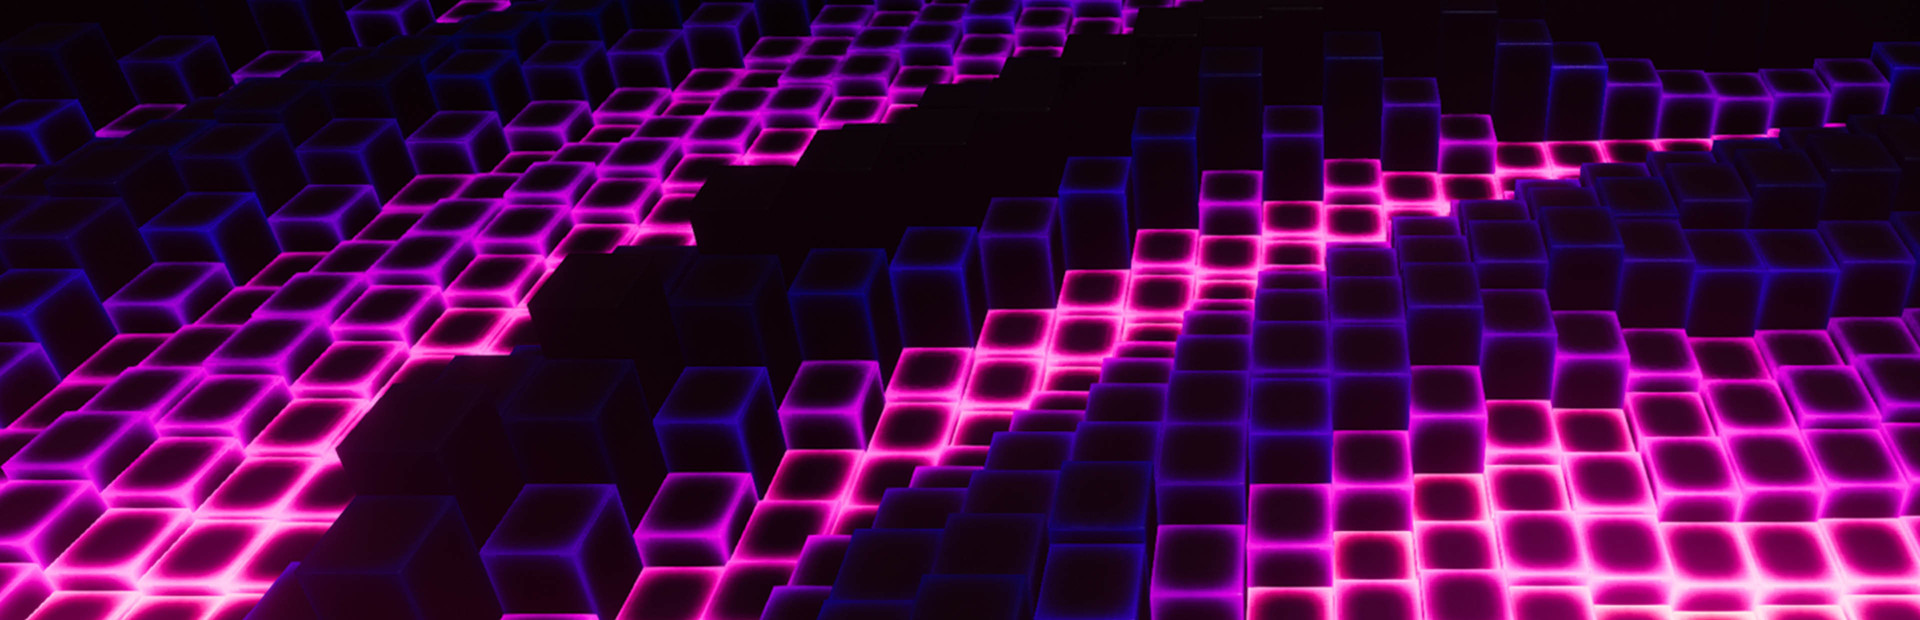 Music Visualizer Engine PC Live Wallpaper cover image